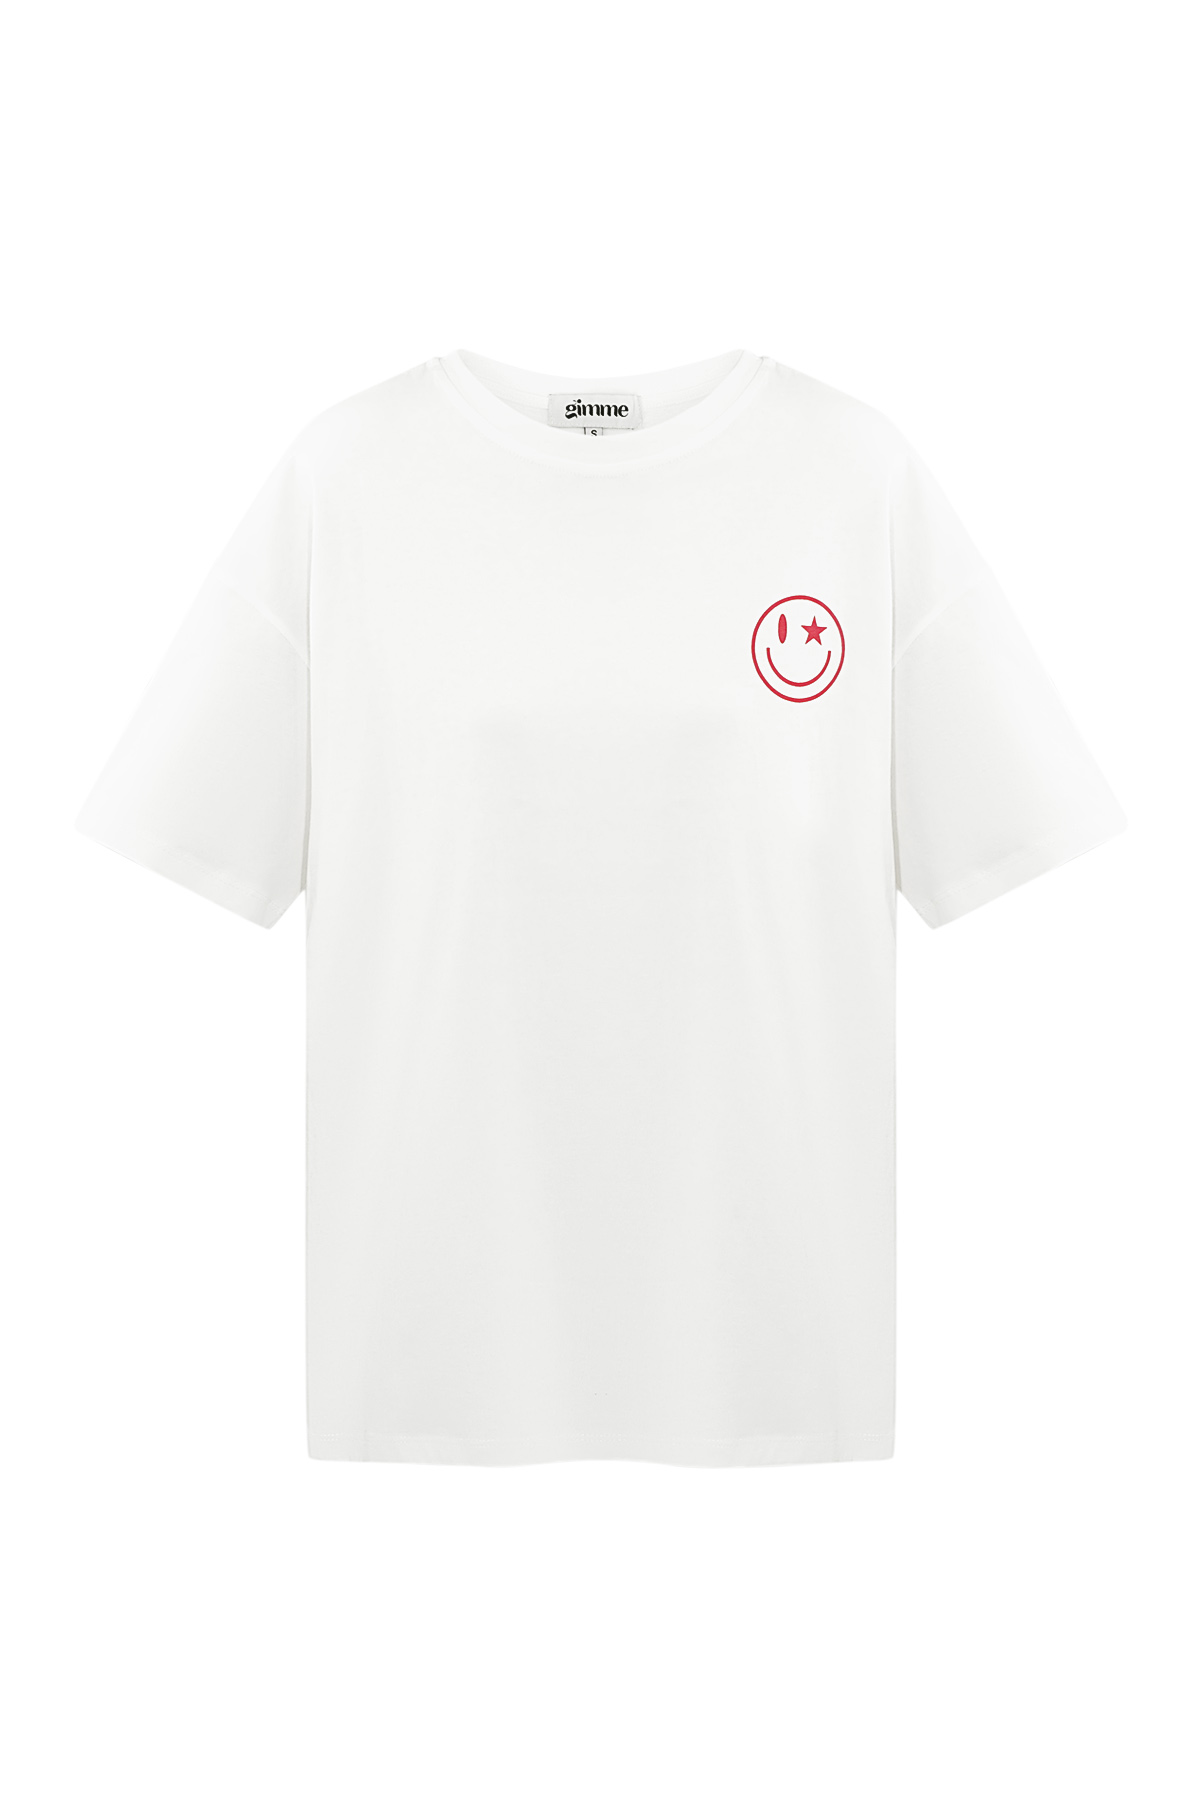 T-Shirt Happy Life Smiley - weiß h5 